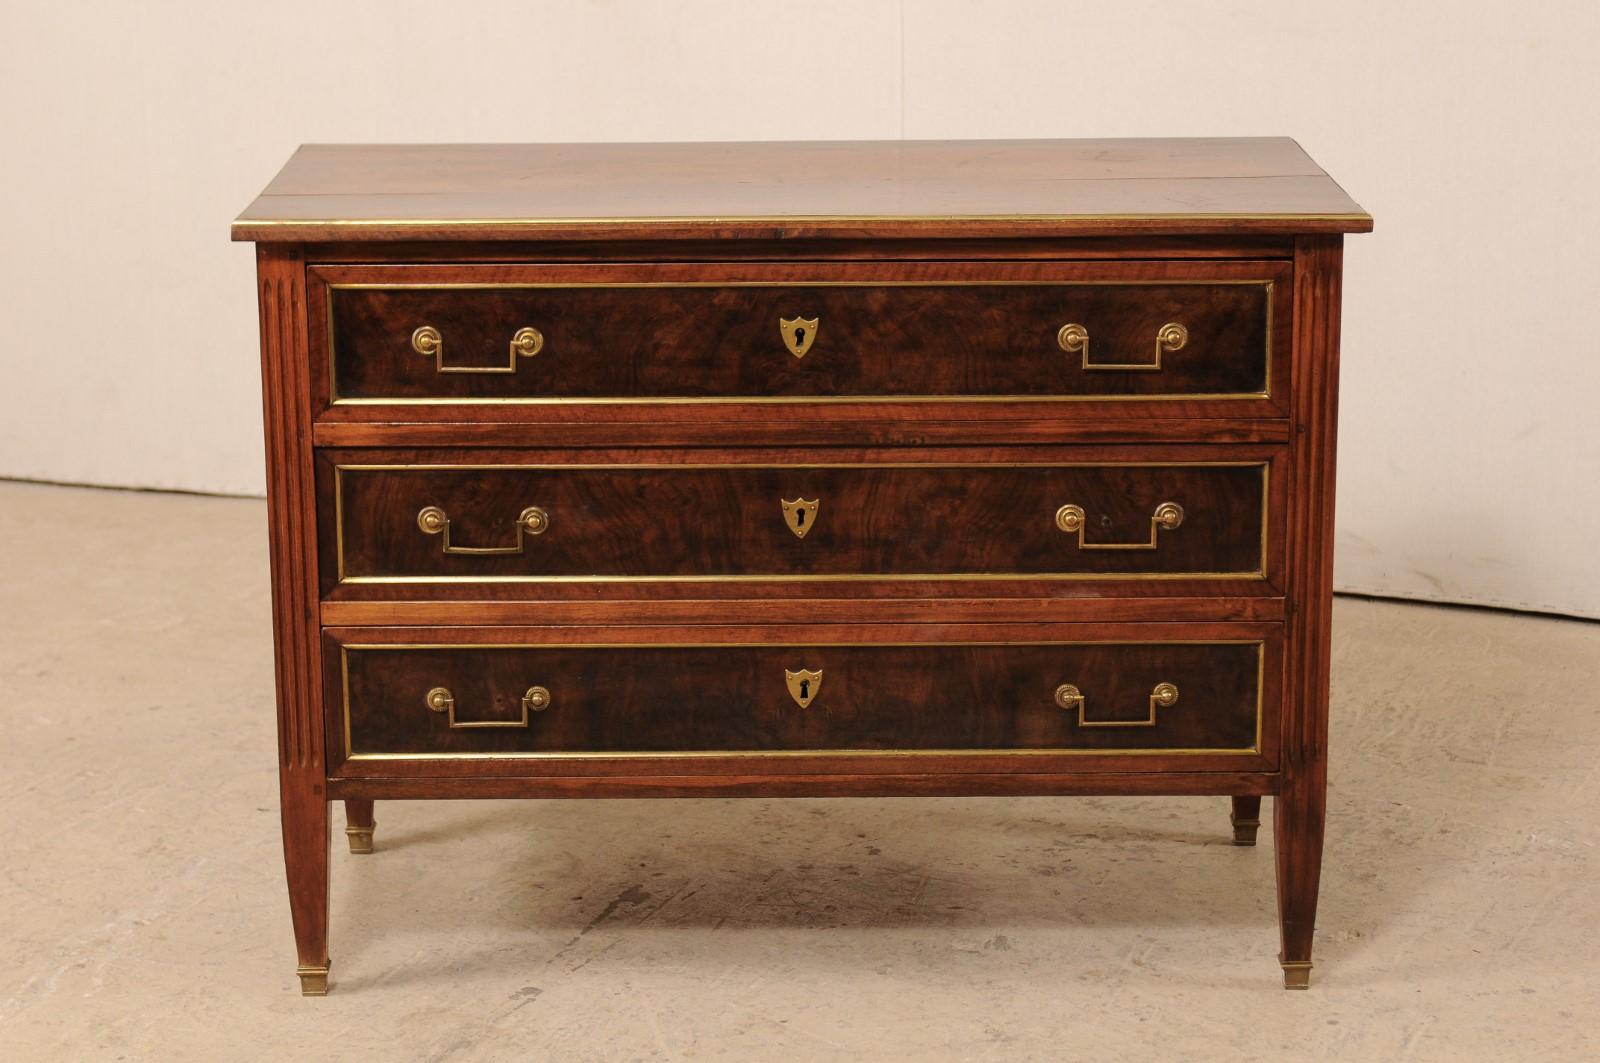 Brass Early 19th Century French Neoclassical Wood Chest of Drawers